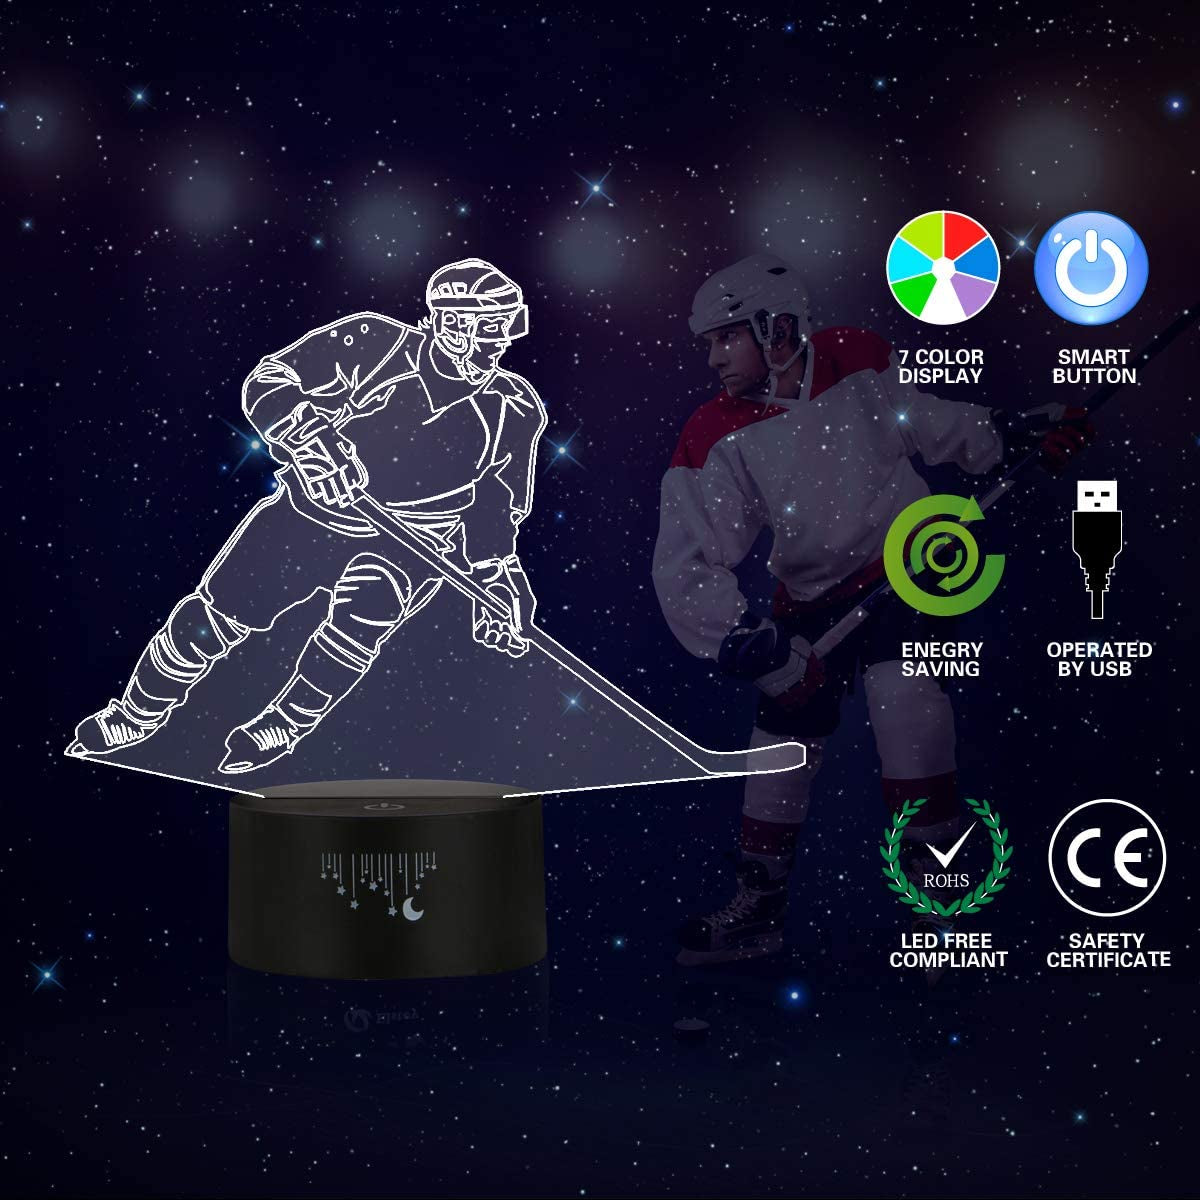 Hockey Night Light for Kids, Led Lights 3D Optical Illusion Lamp Bedroom Decor Lighting Nightlight with Smart Touch 7 Colors, Cool Gifts Toys for Girls Boys Sports Fan 2 3 4 5 6 7 8 9 10+ Year Old